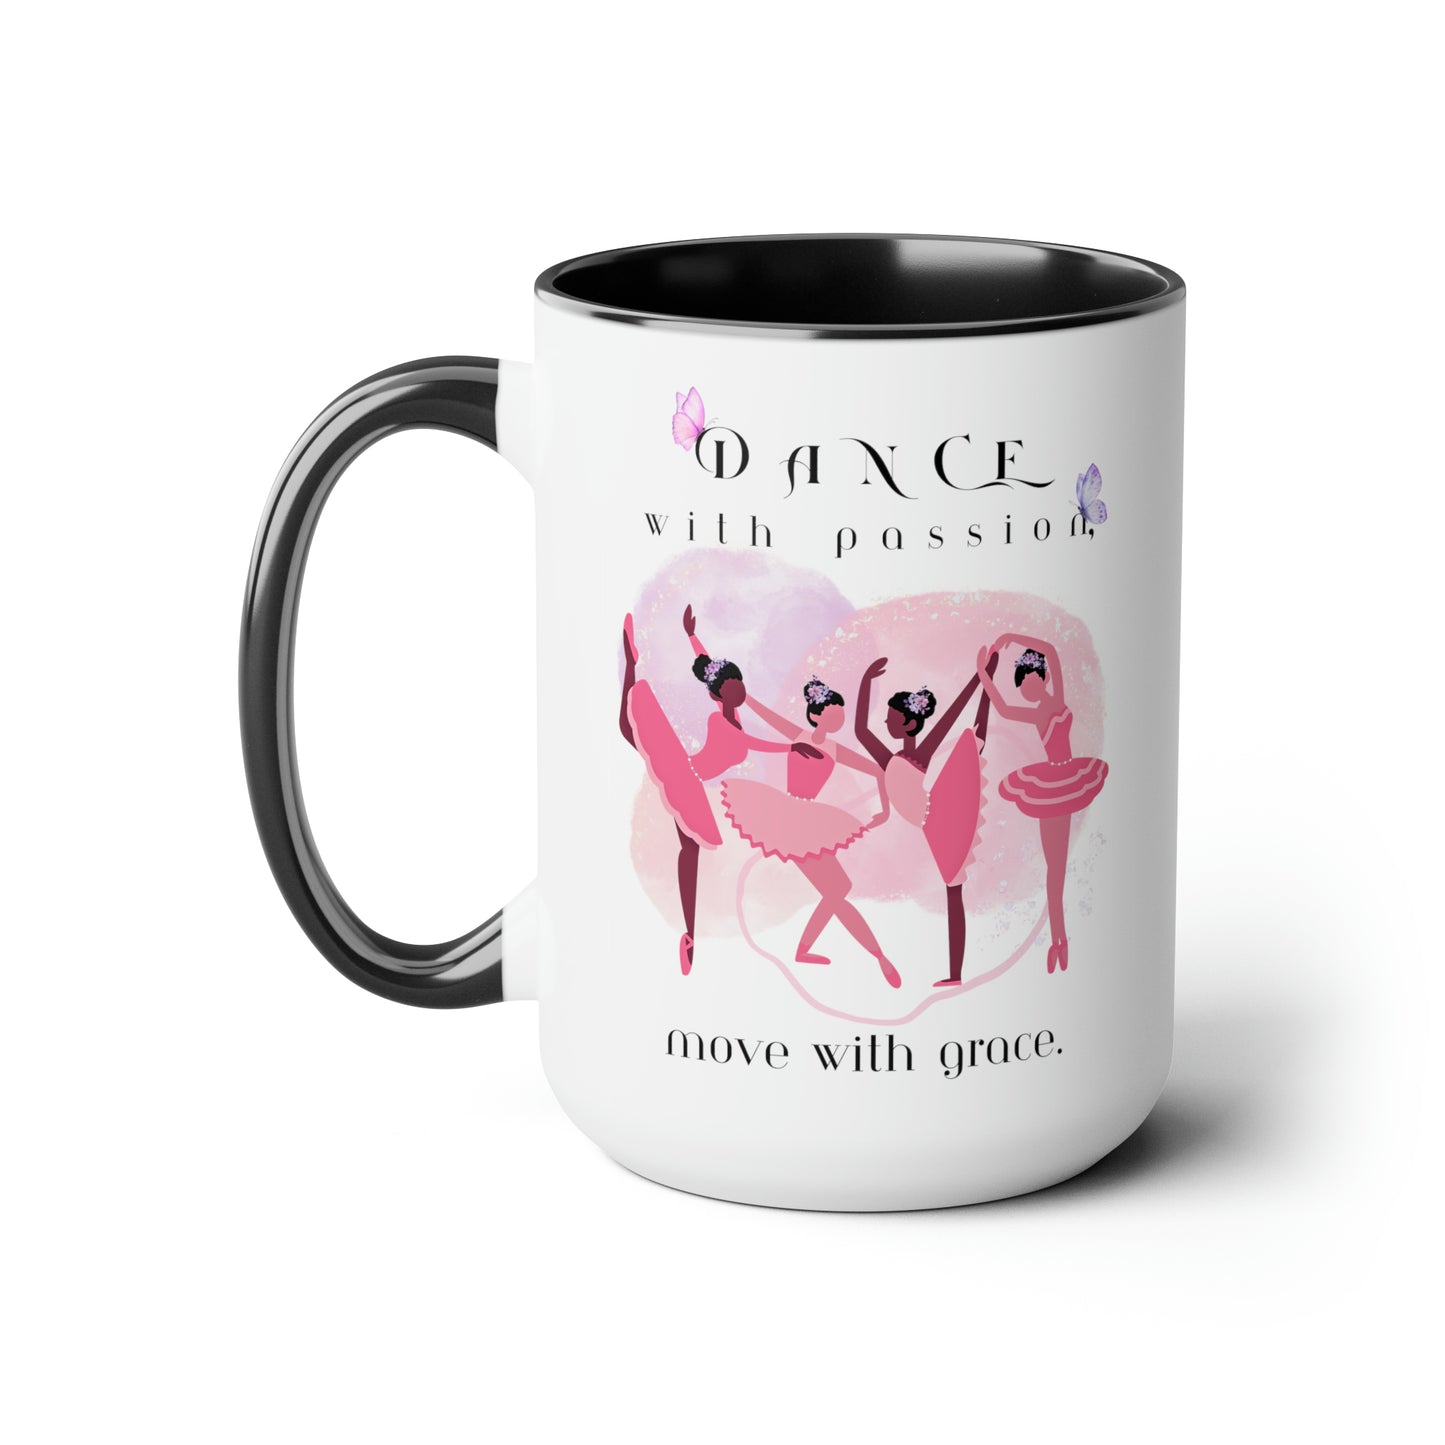 Two-Tone Coffee Mugs - Dance with passion Ballerina